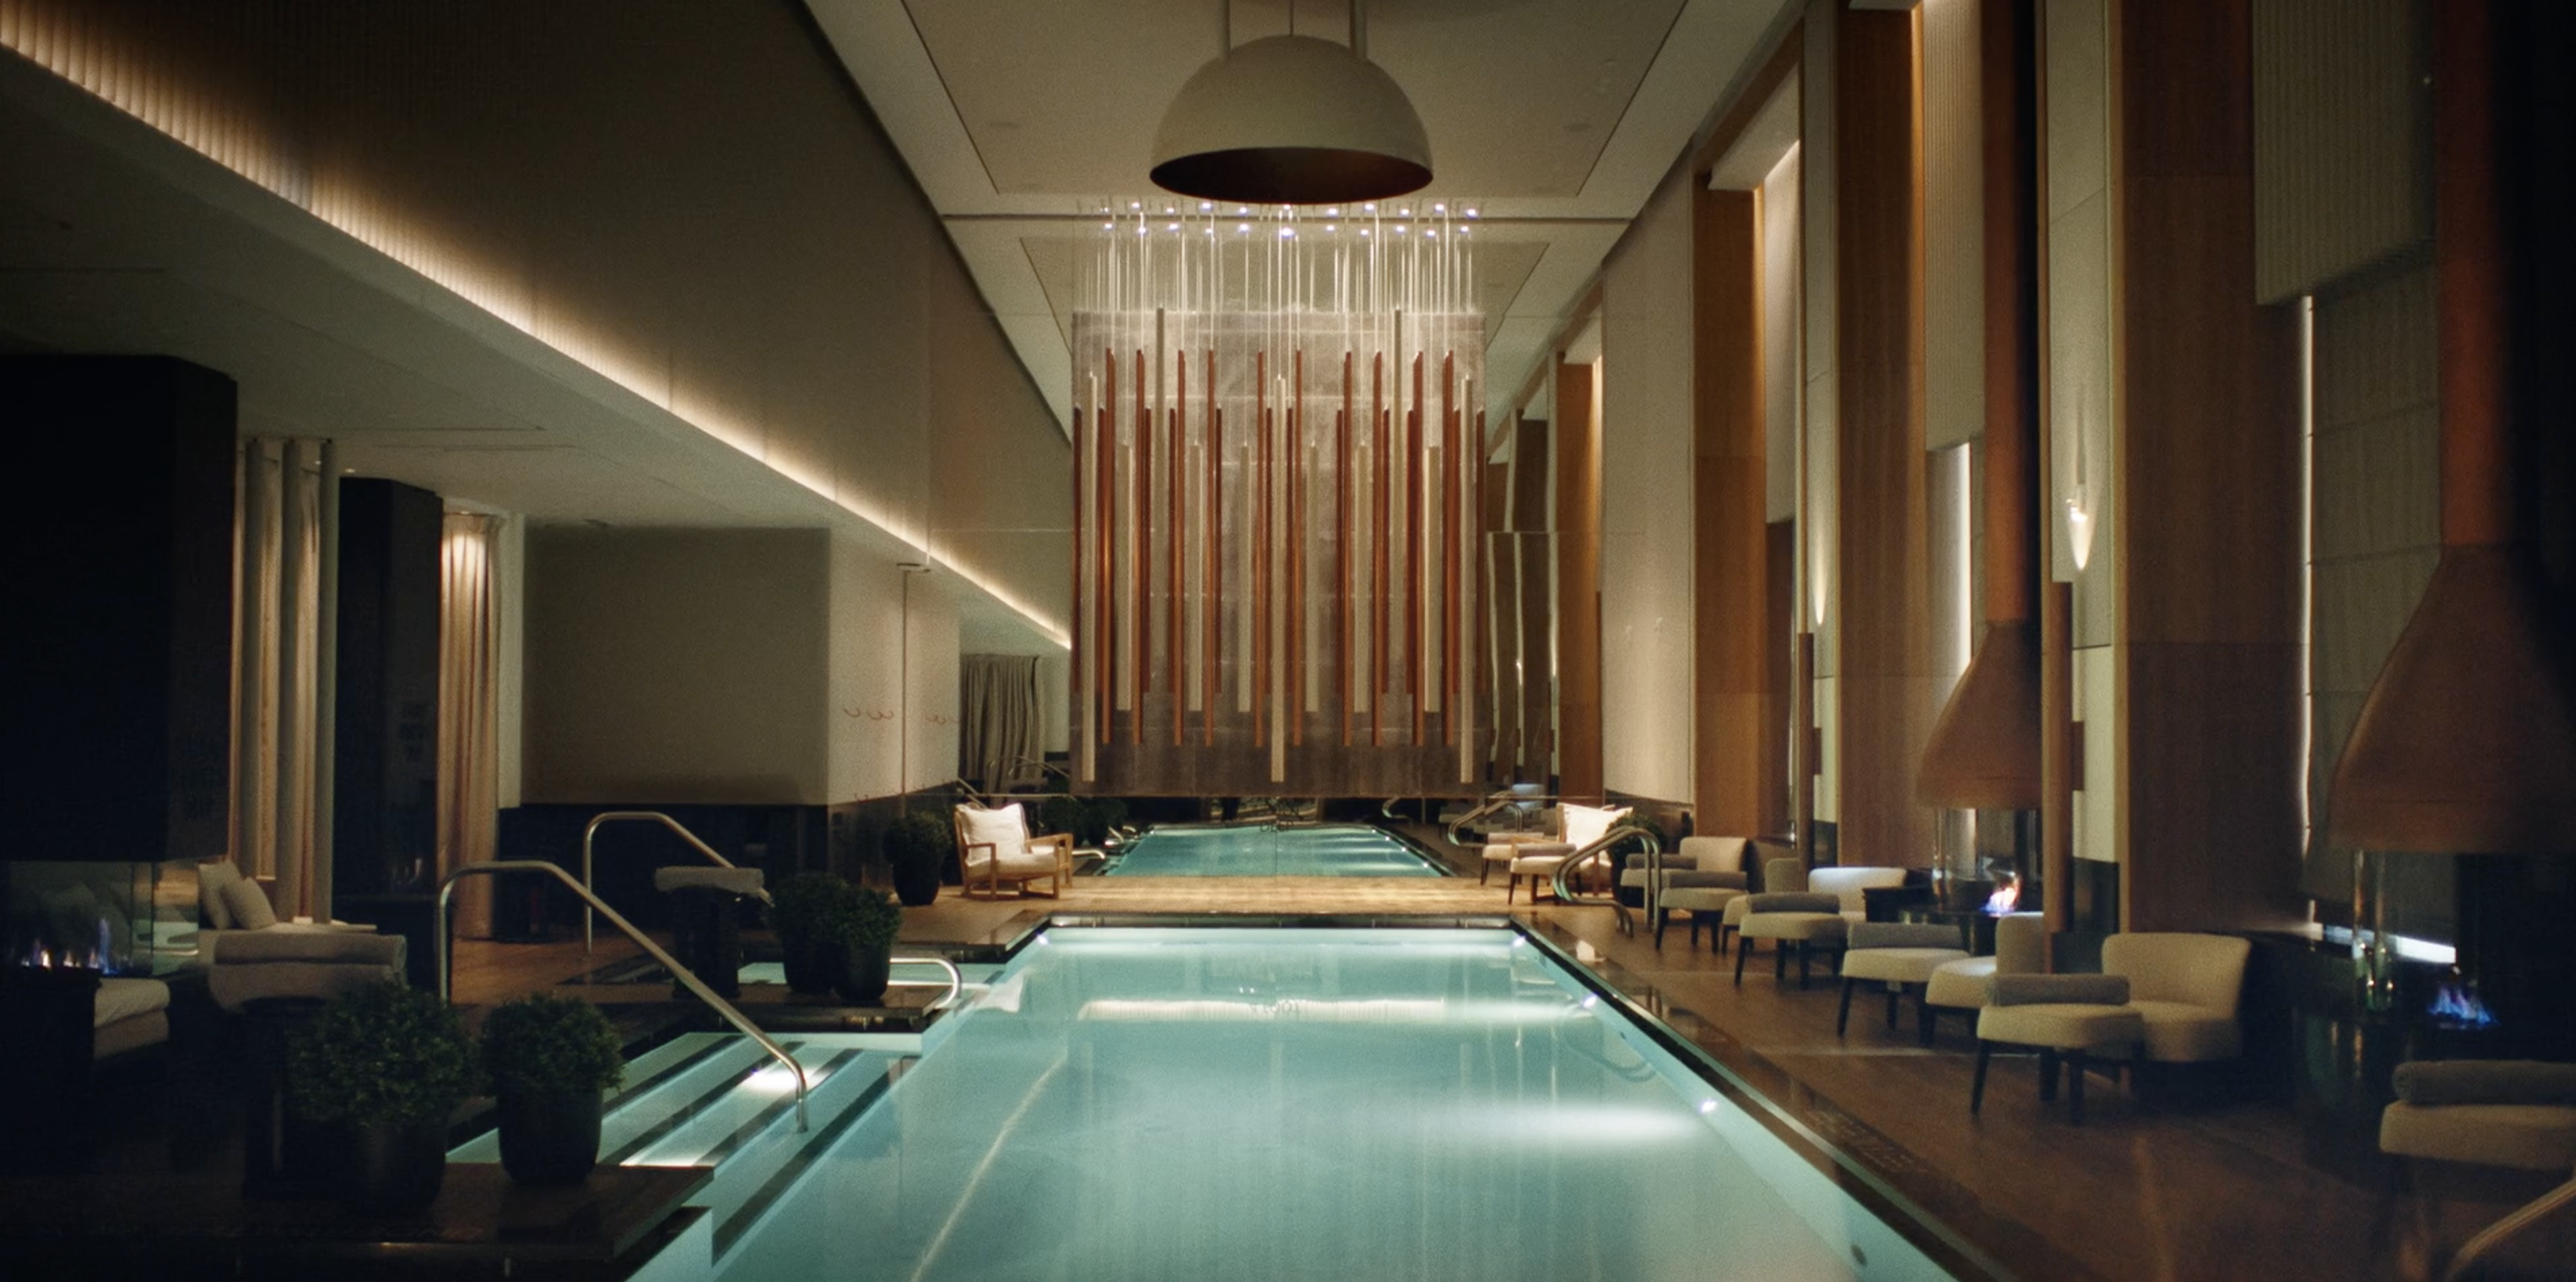 LBB: Aman Hotel Group Launches New York Location with Slick Spot